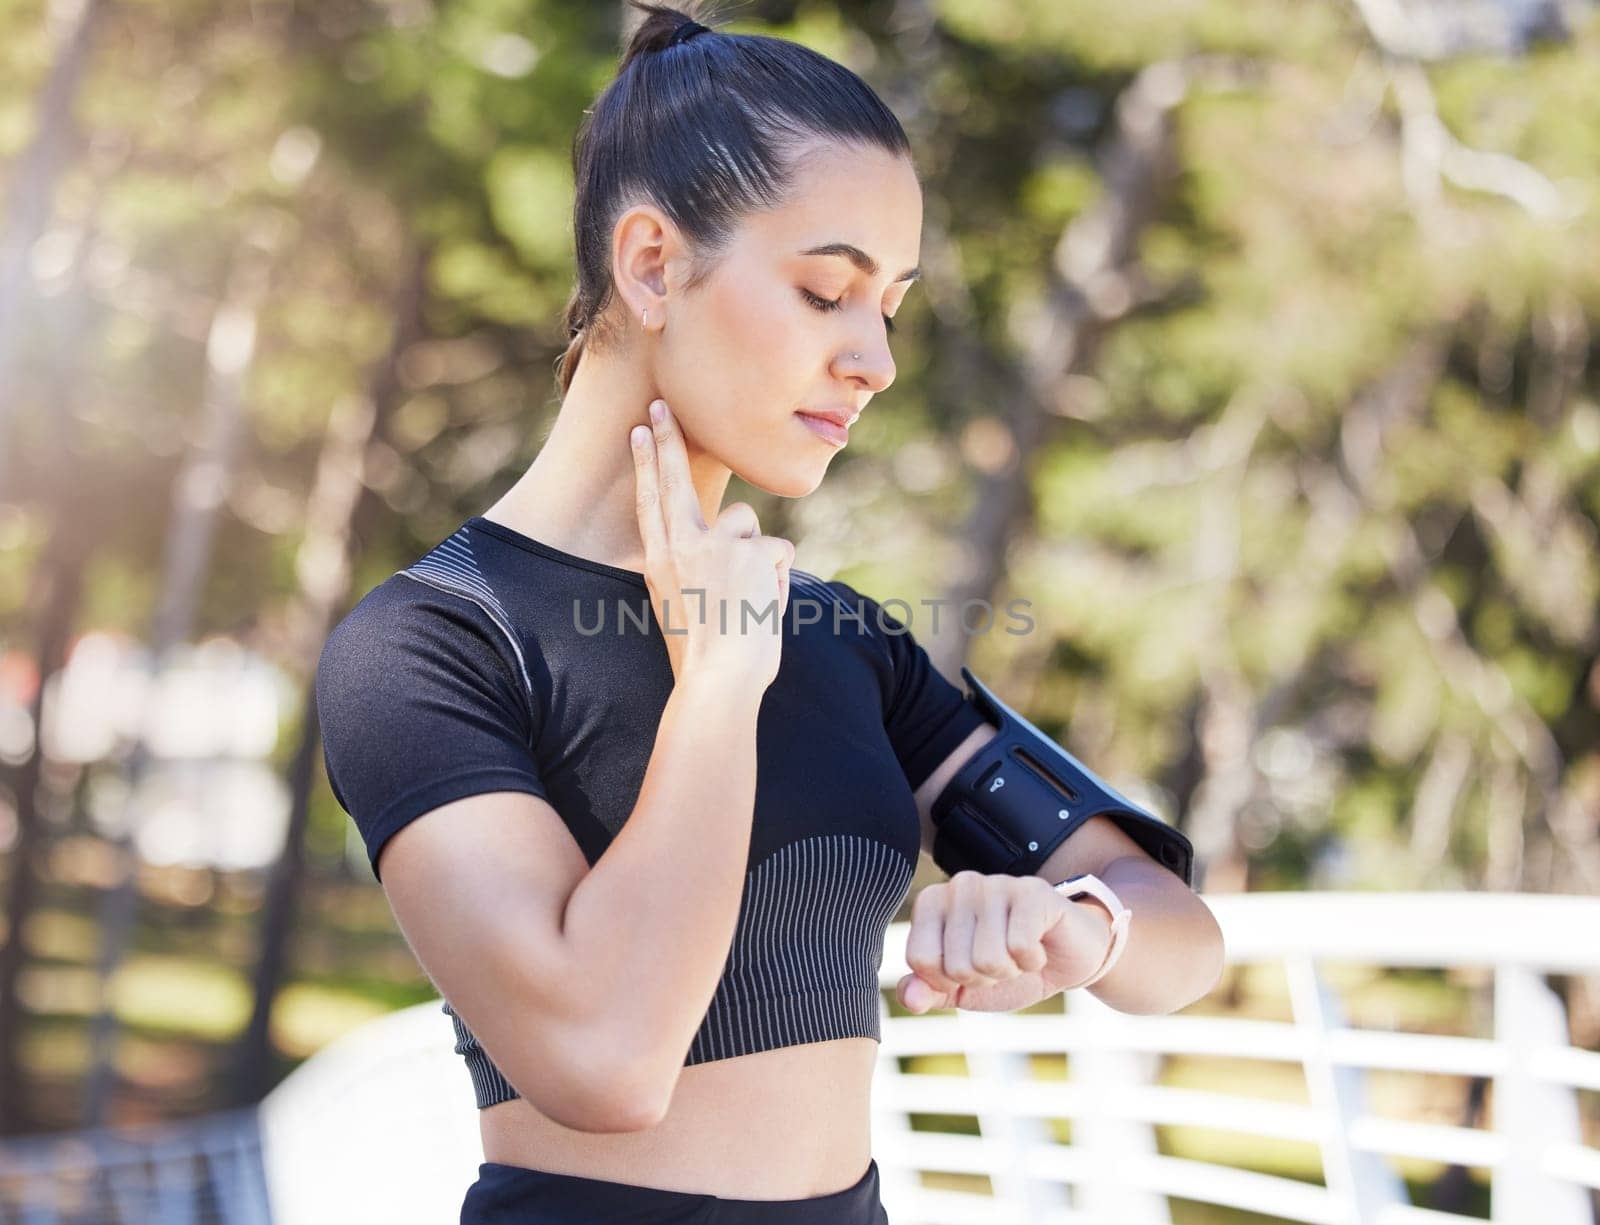 Woman runner, watch and neck for pulse in park, bridge or outdoor for fitness, health or training for sport. Girl, heart rate and check clock for running, performance or wellness in summer sunshine.